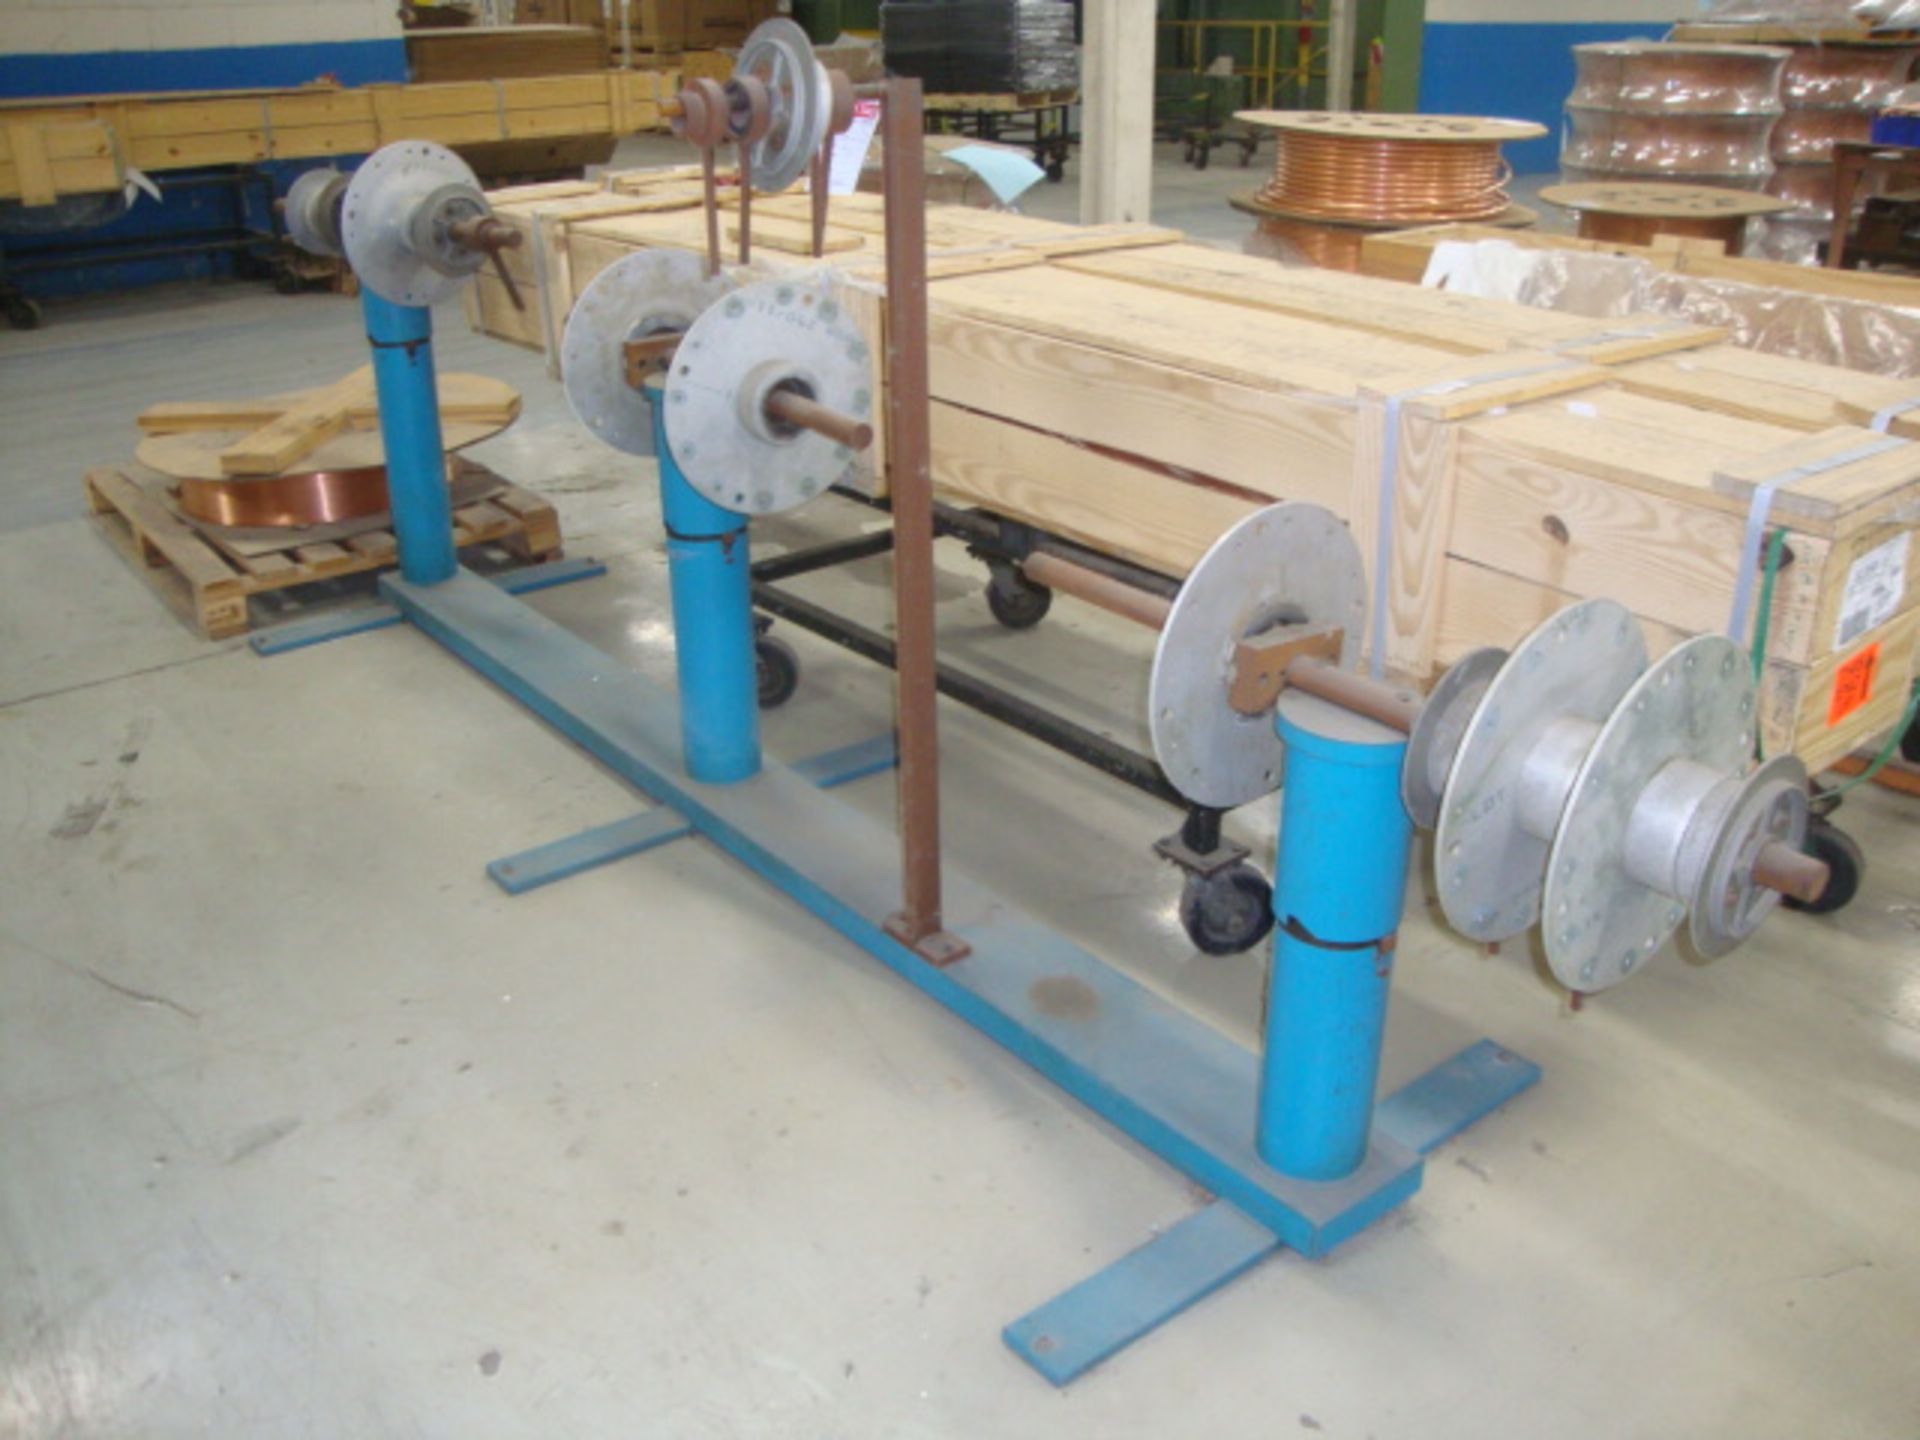 Tubing Spool Stand, spool towers rotate, approx. 120" x 36" x 55" tall - Image 2 of 5